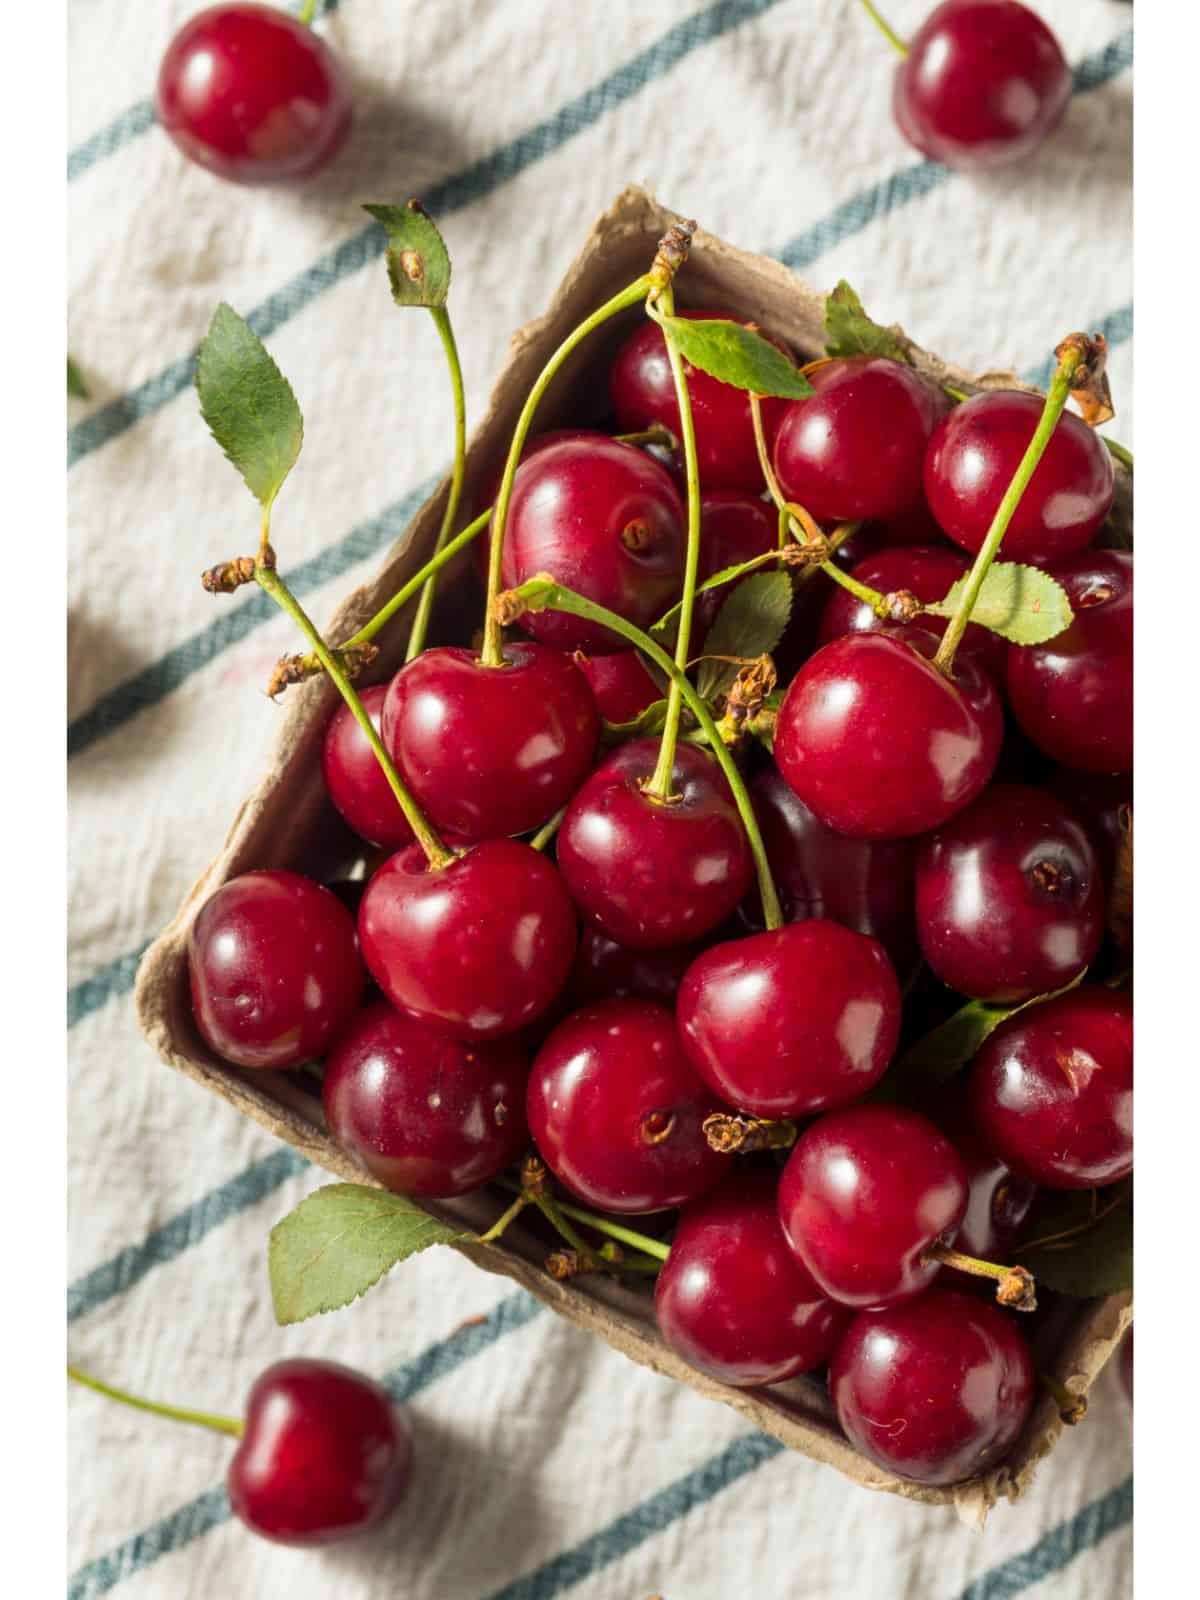 An up close view of red cherries on green stems in a brown square cardboard box on top of a white and blue striped kitchen towel